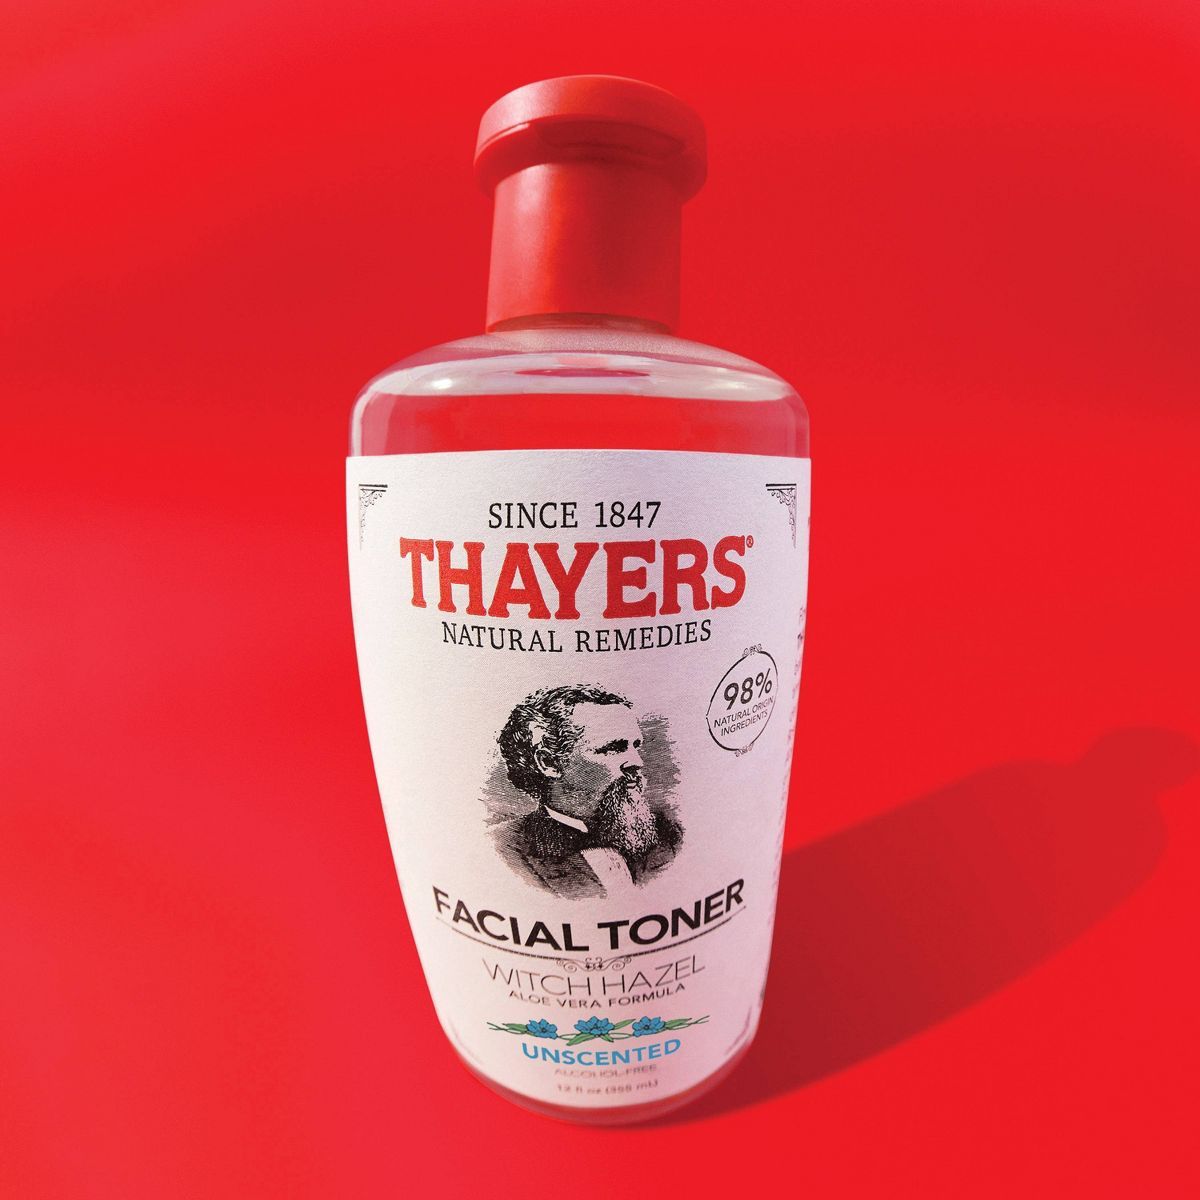 Thayers Natural Remedies Witch Hazel Alcohol Free Unscented Toner - 12 fl oz | Target